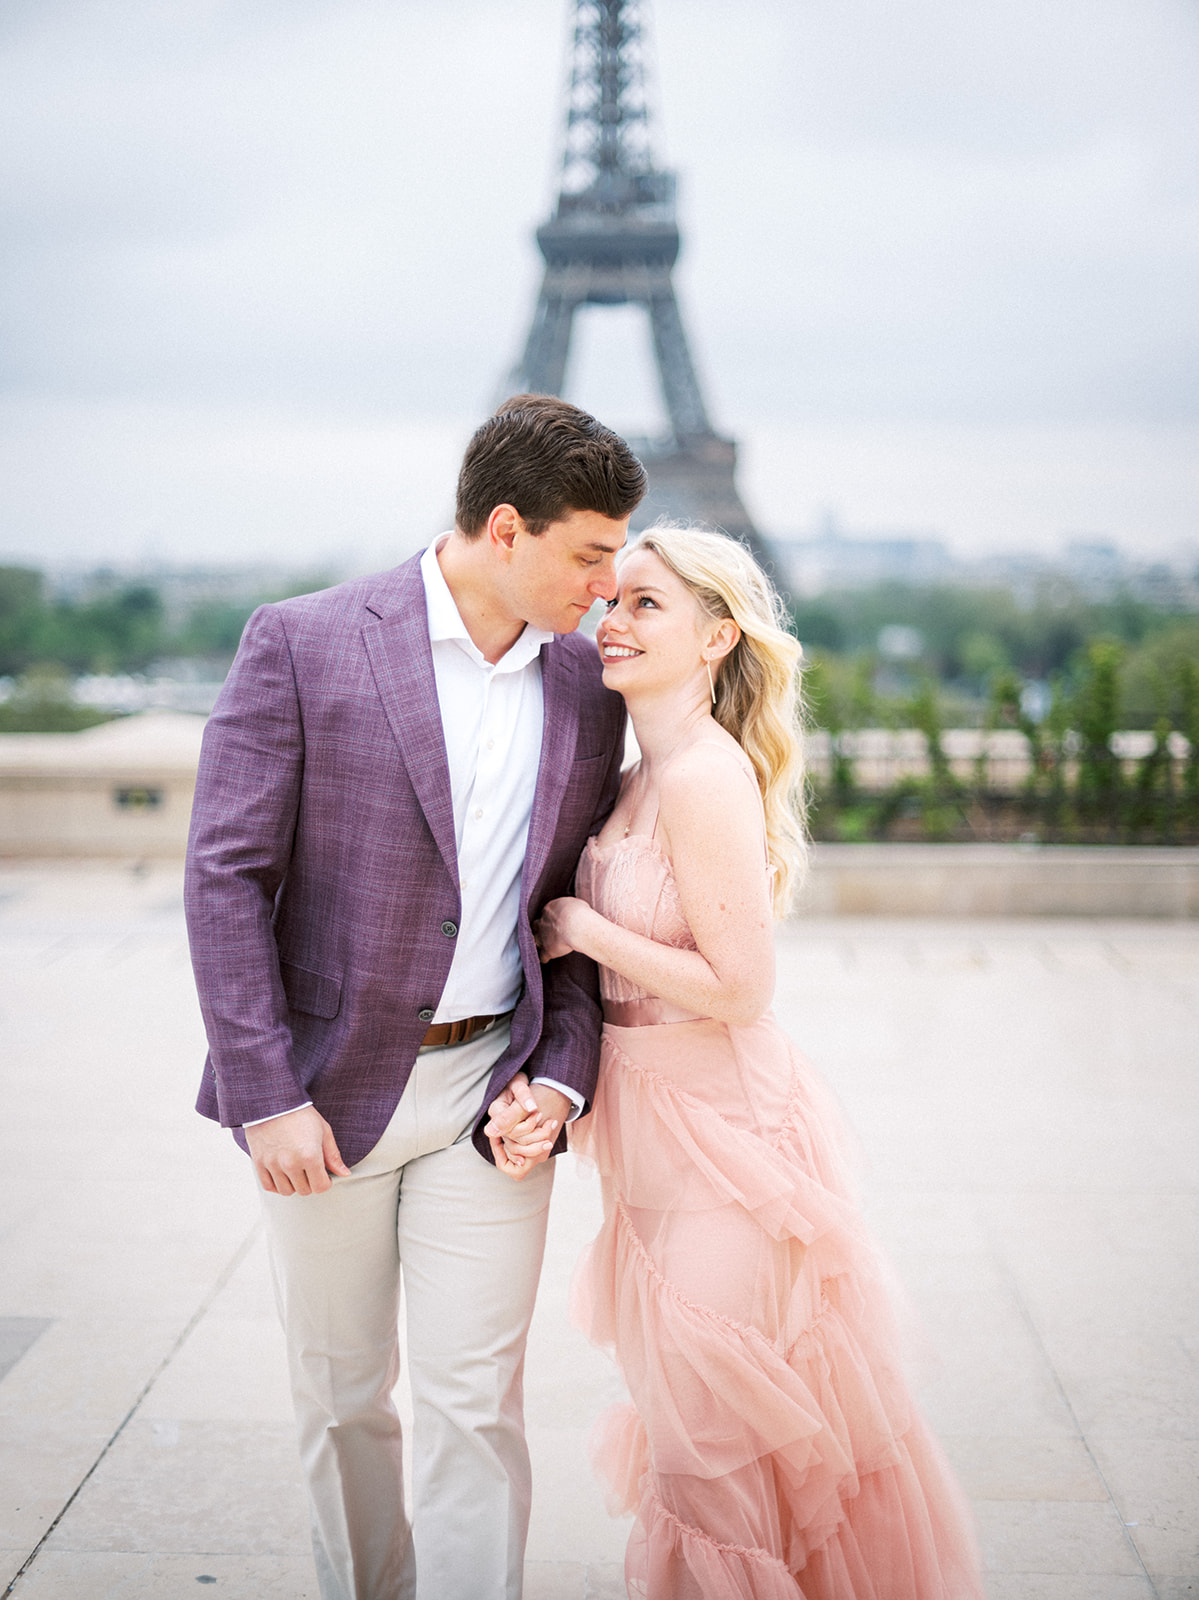 Couple nestled close to one another with Eiffel Tower in the background.